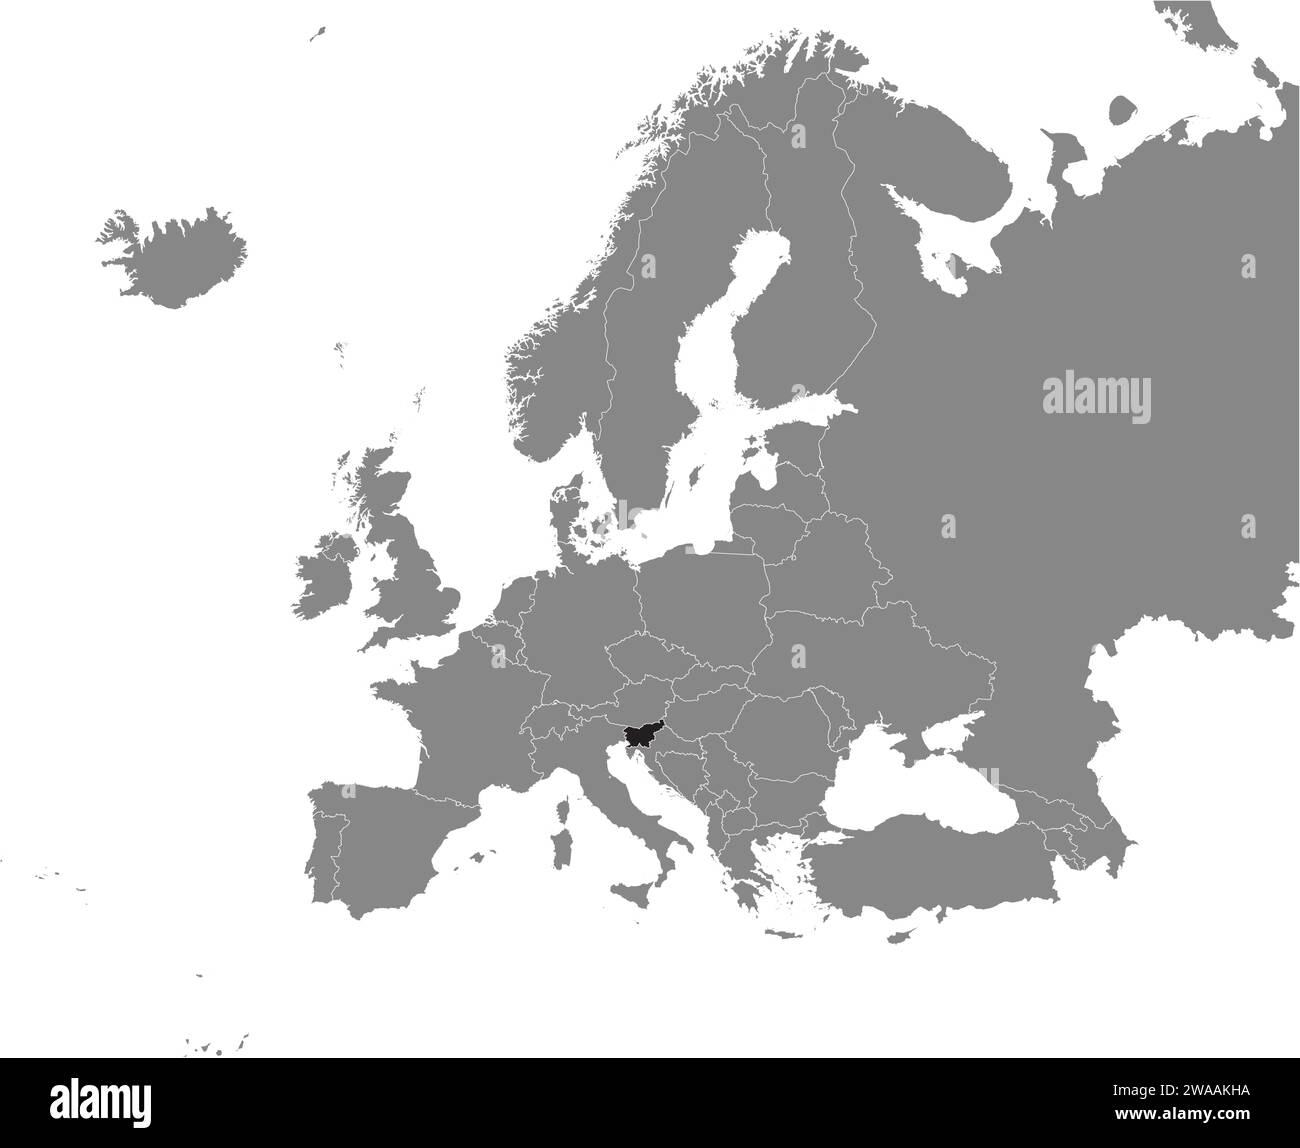 Location map of the REPUBLIC OF SLOVENIA, EUROPE Stock Vector